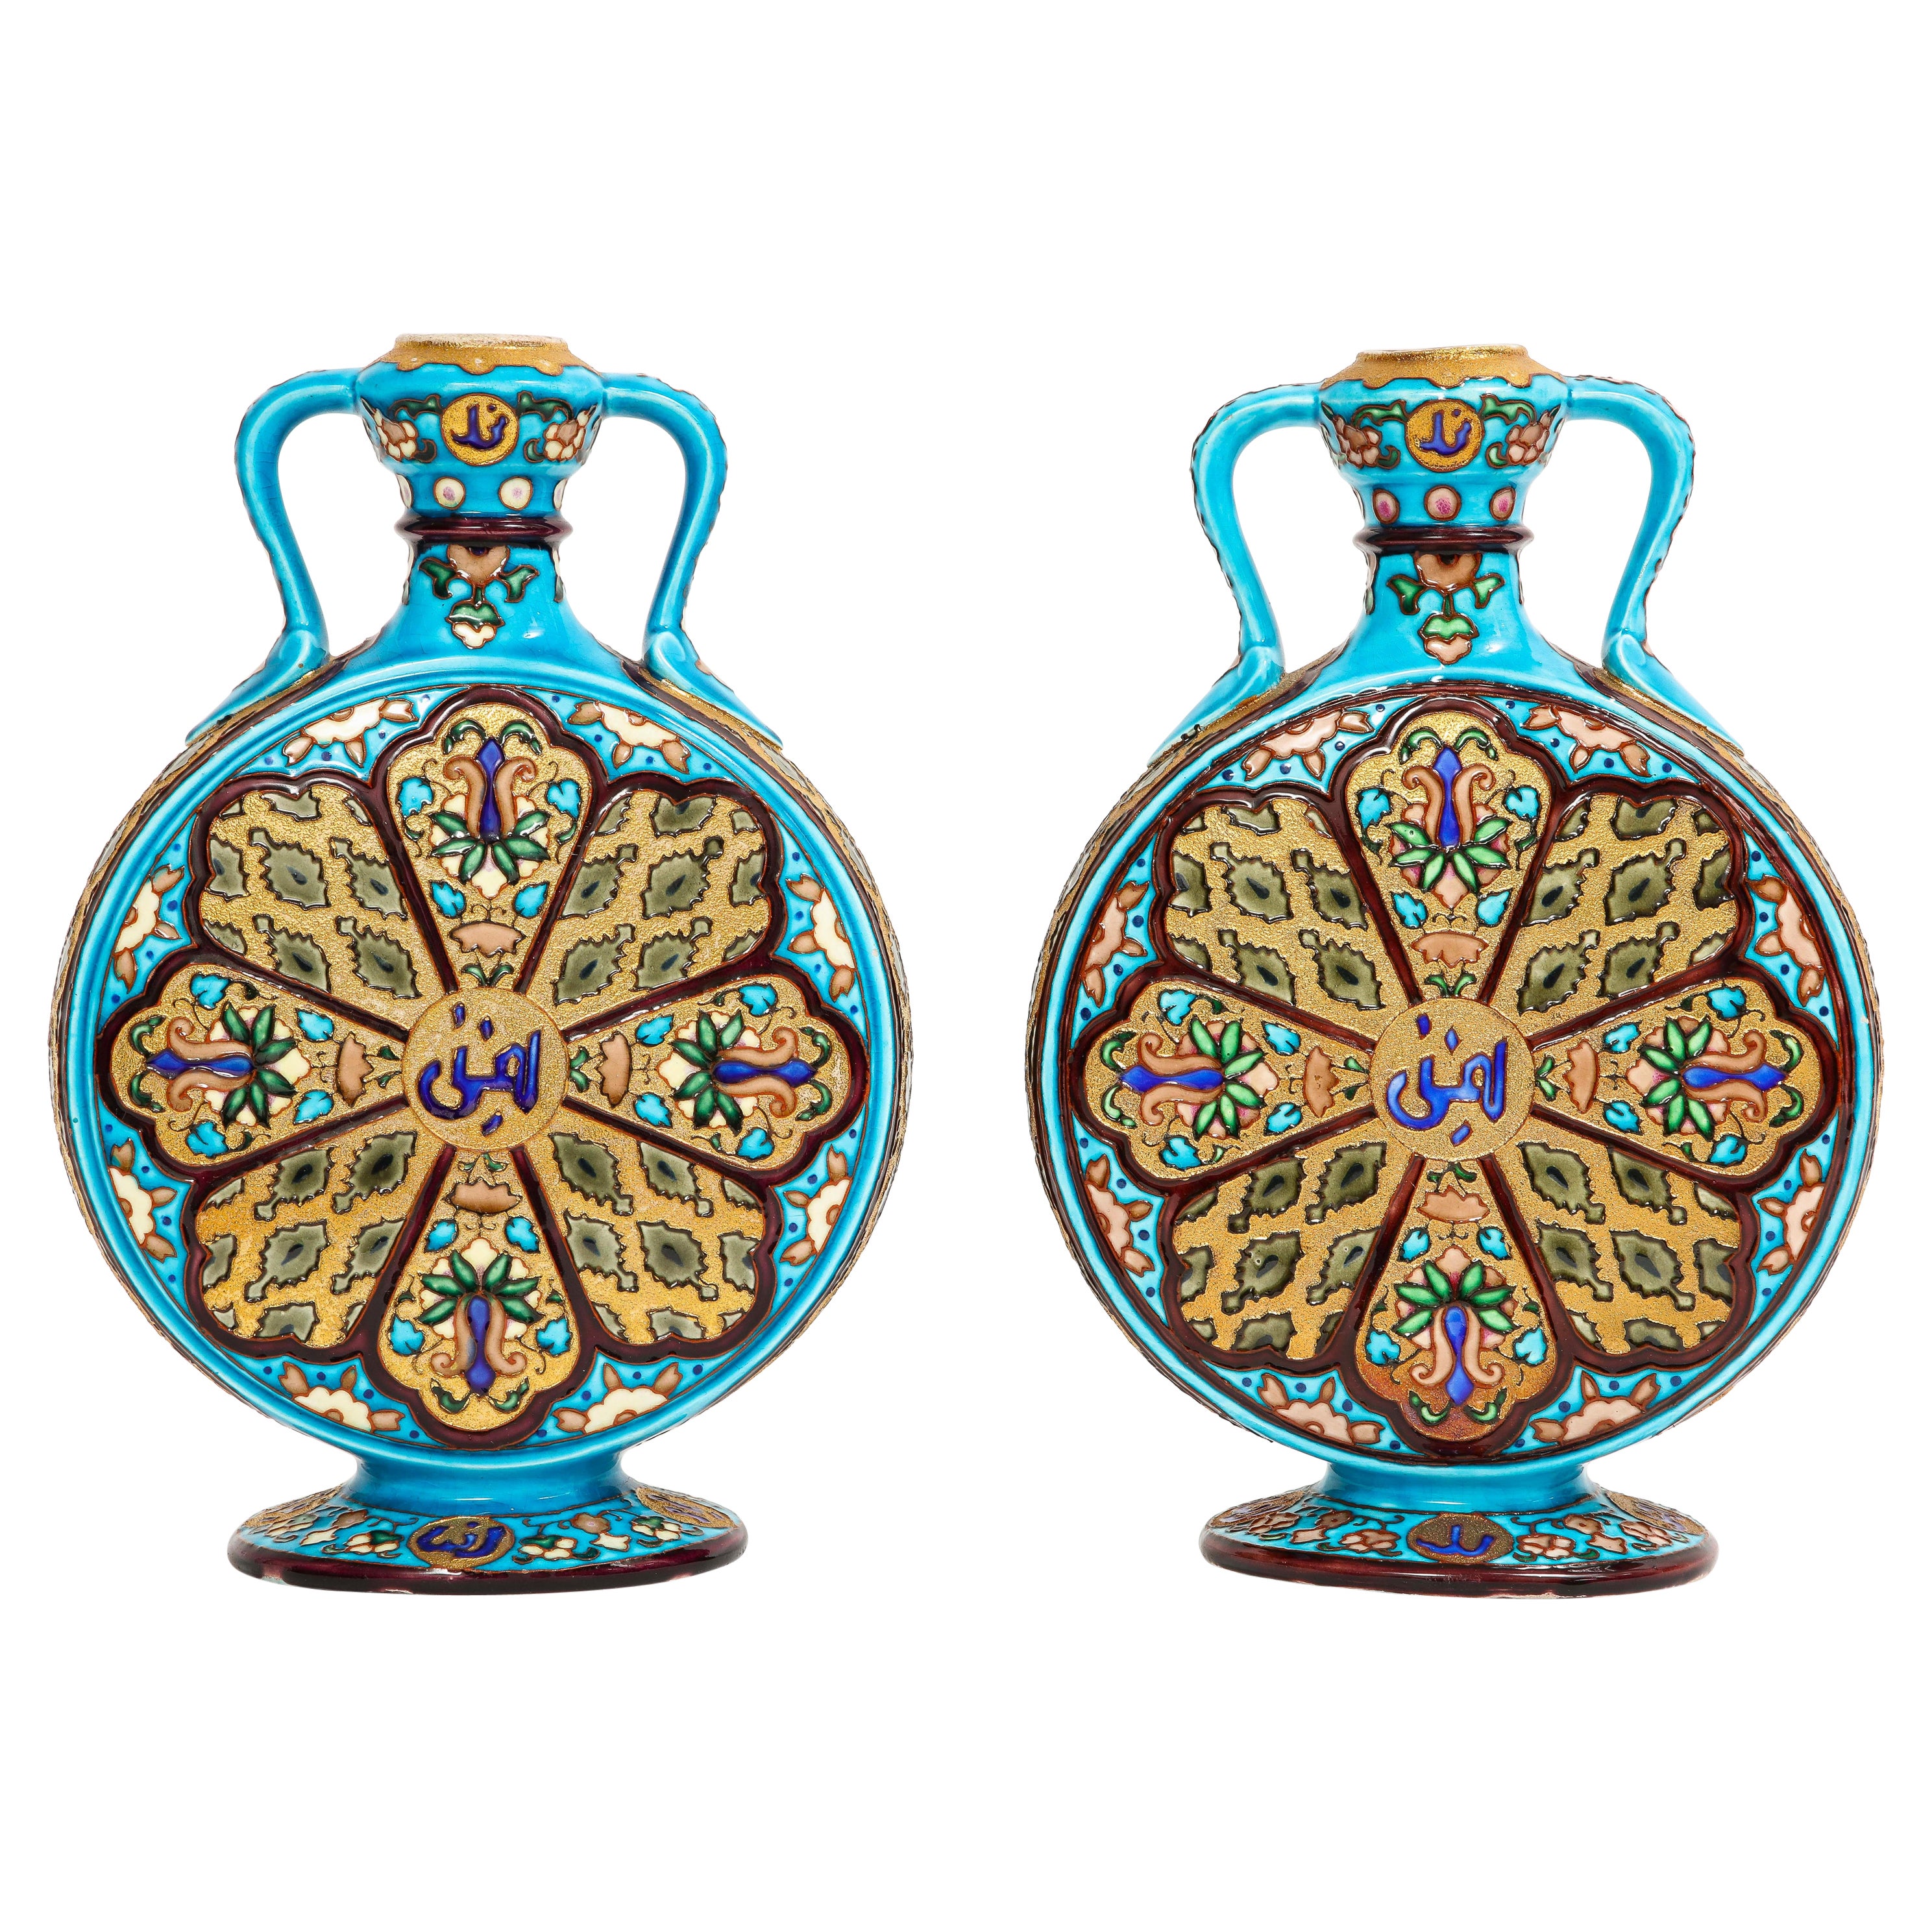 Pair of French Porcelain Moon Flask Vases, for the Islamic/Moorish Market